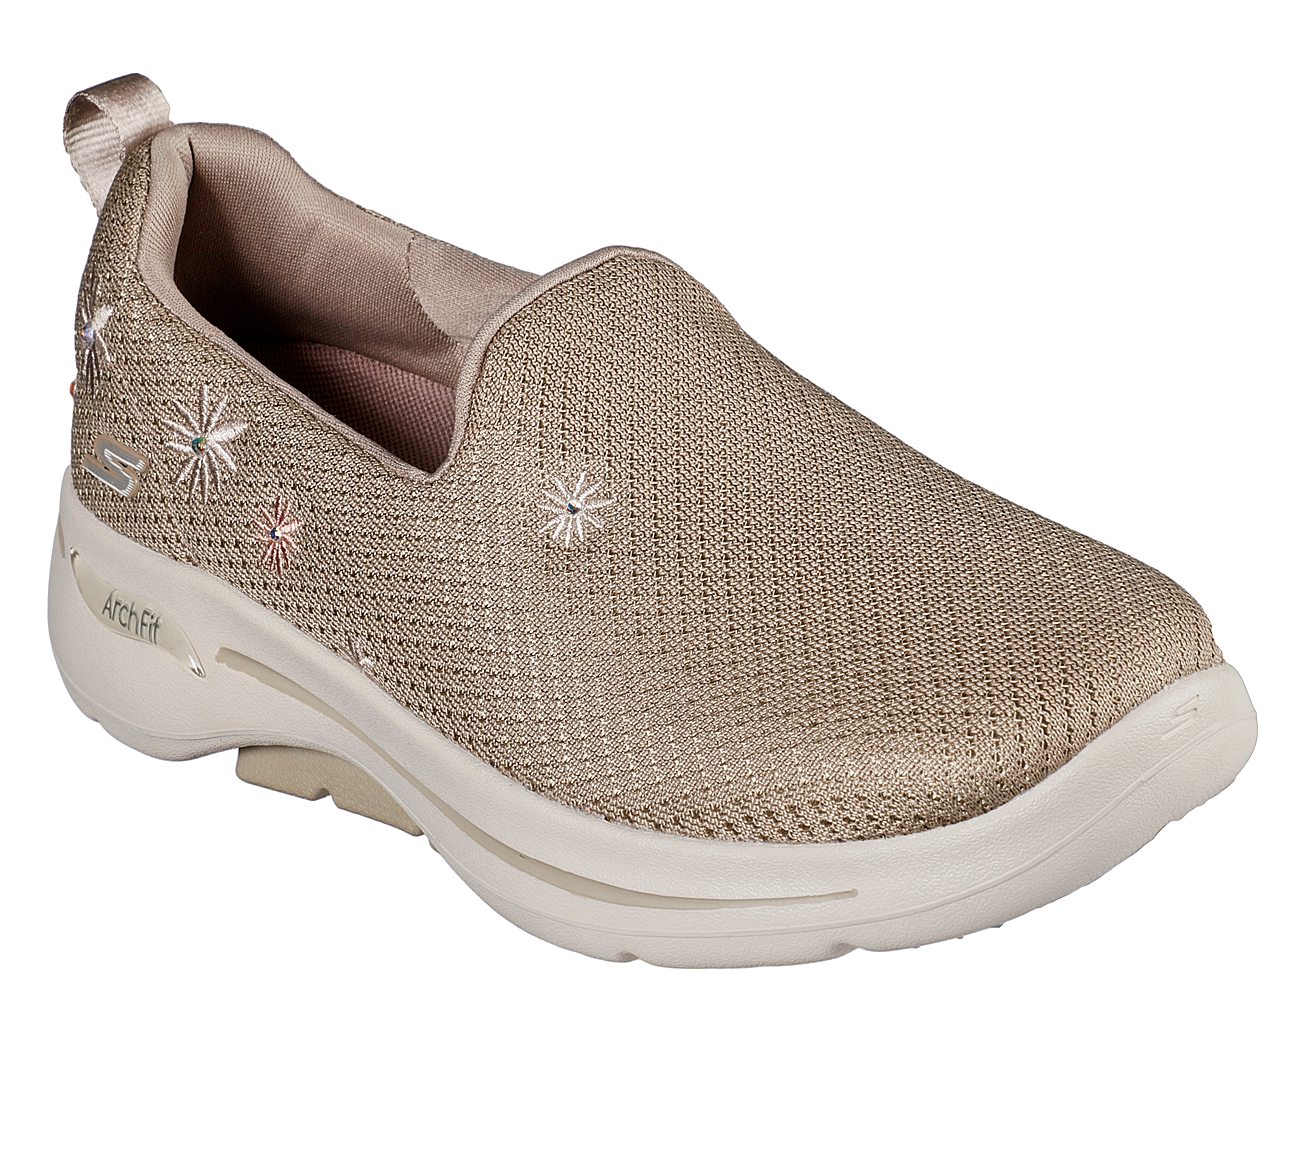 GO WALK ARCH FIT- DAISY DREAM, TTAUPE Footwear Lateral View